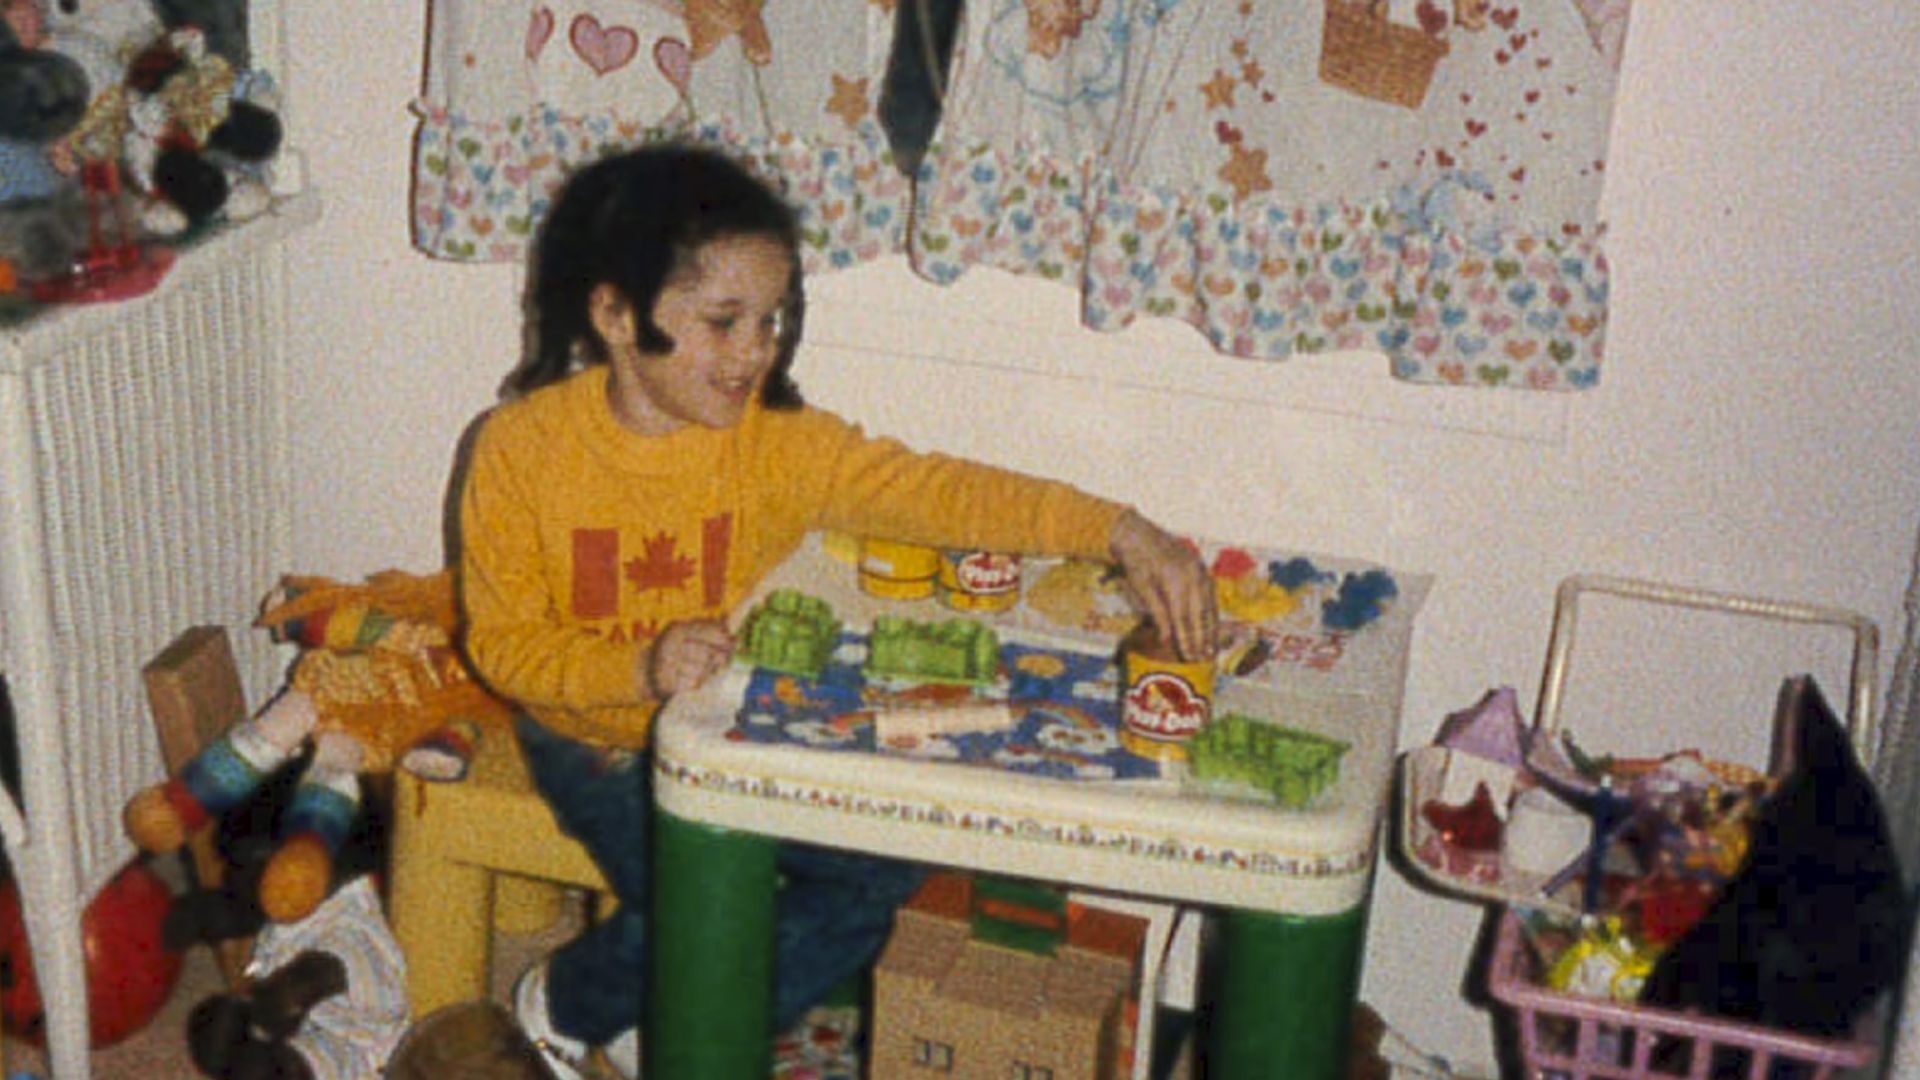 A young Meghan Markle playing with Play-doh